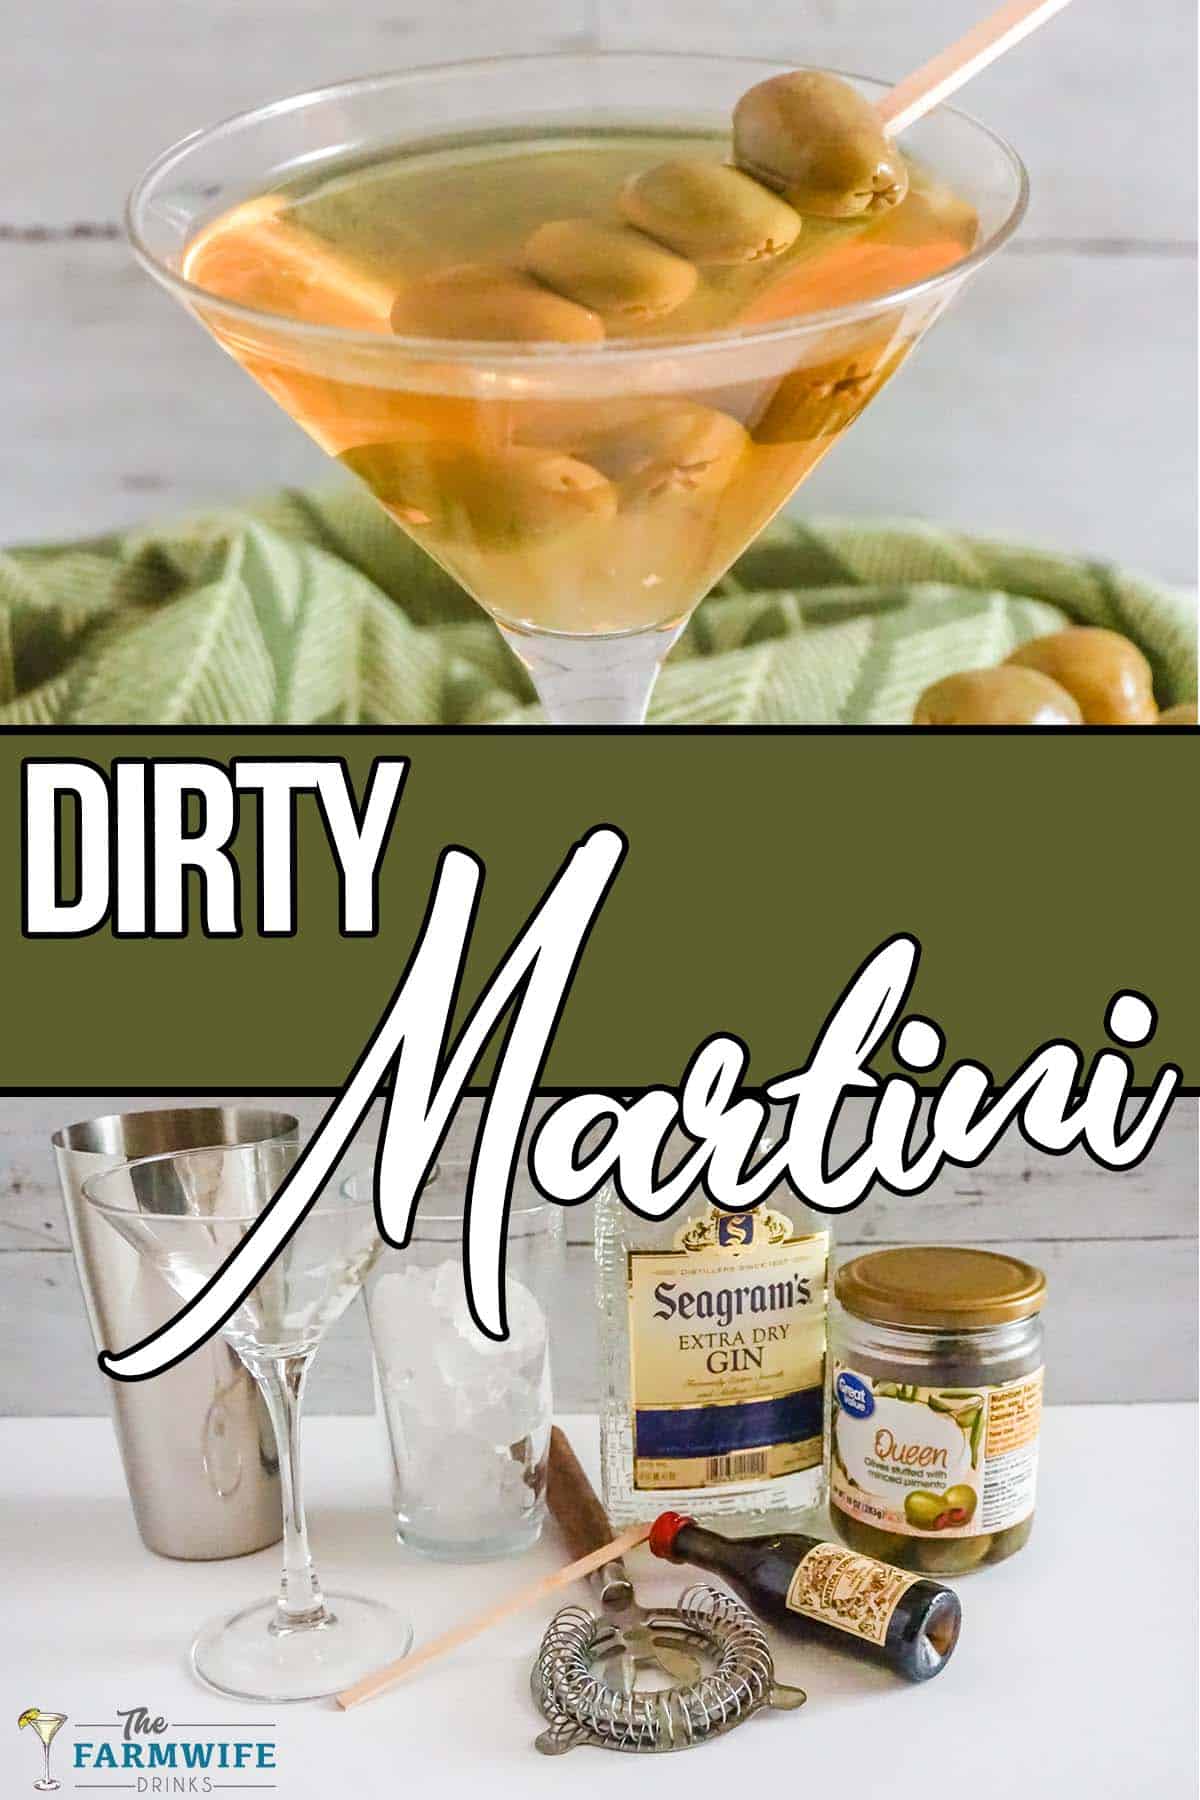 photo collage of olive-filled martini with text which reads dirty martini cocktail